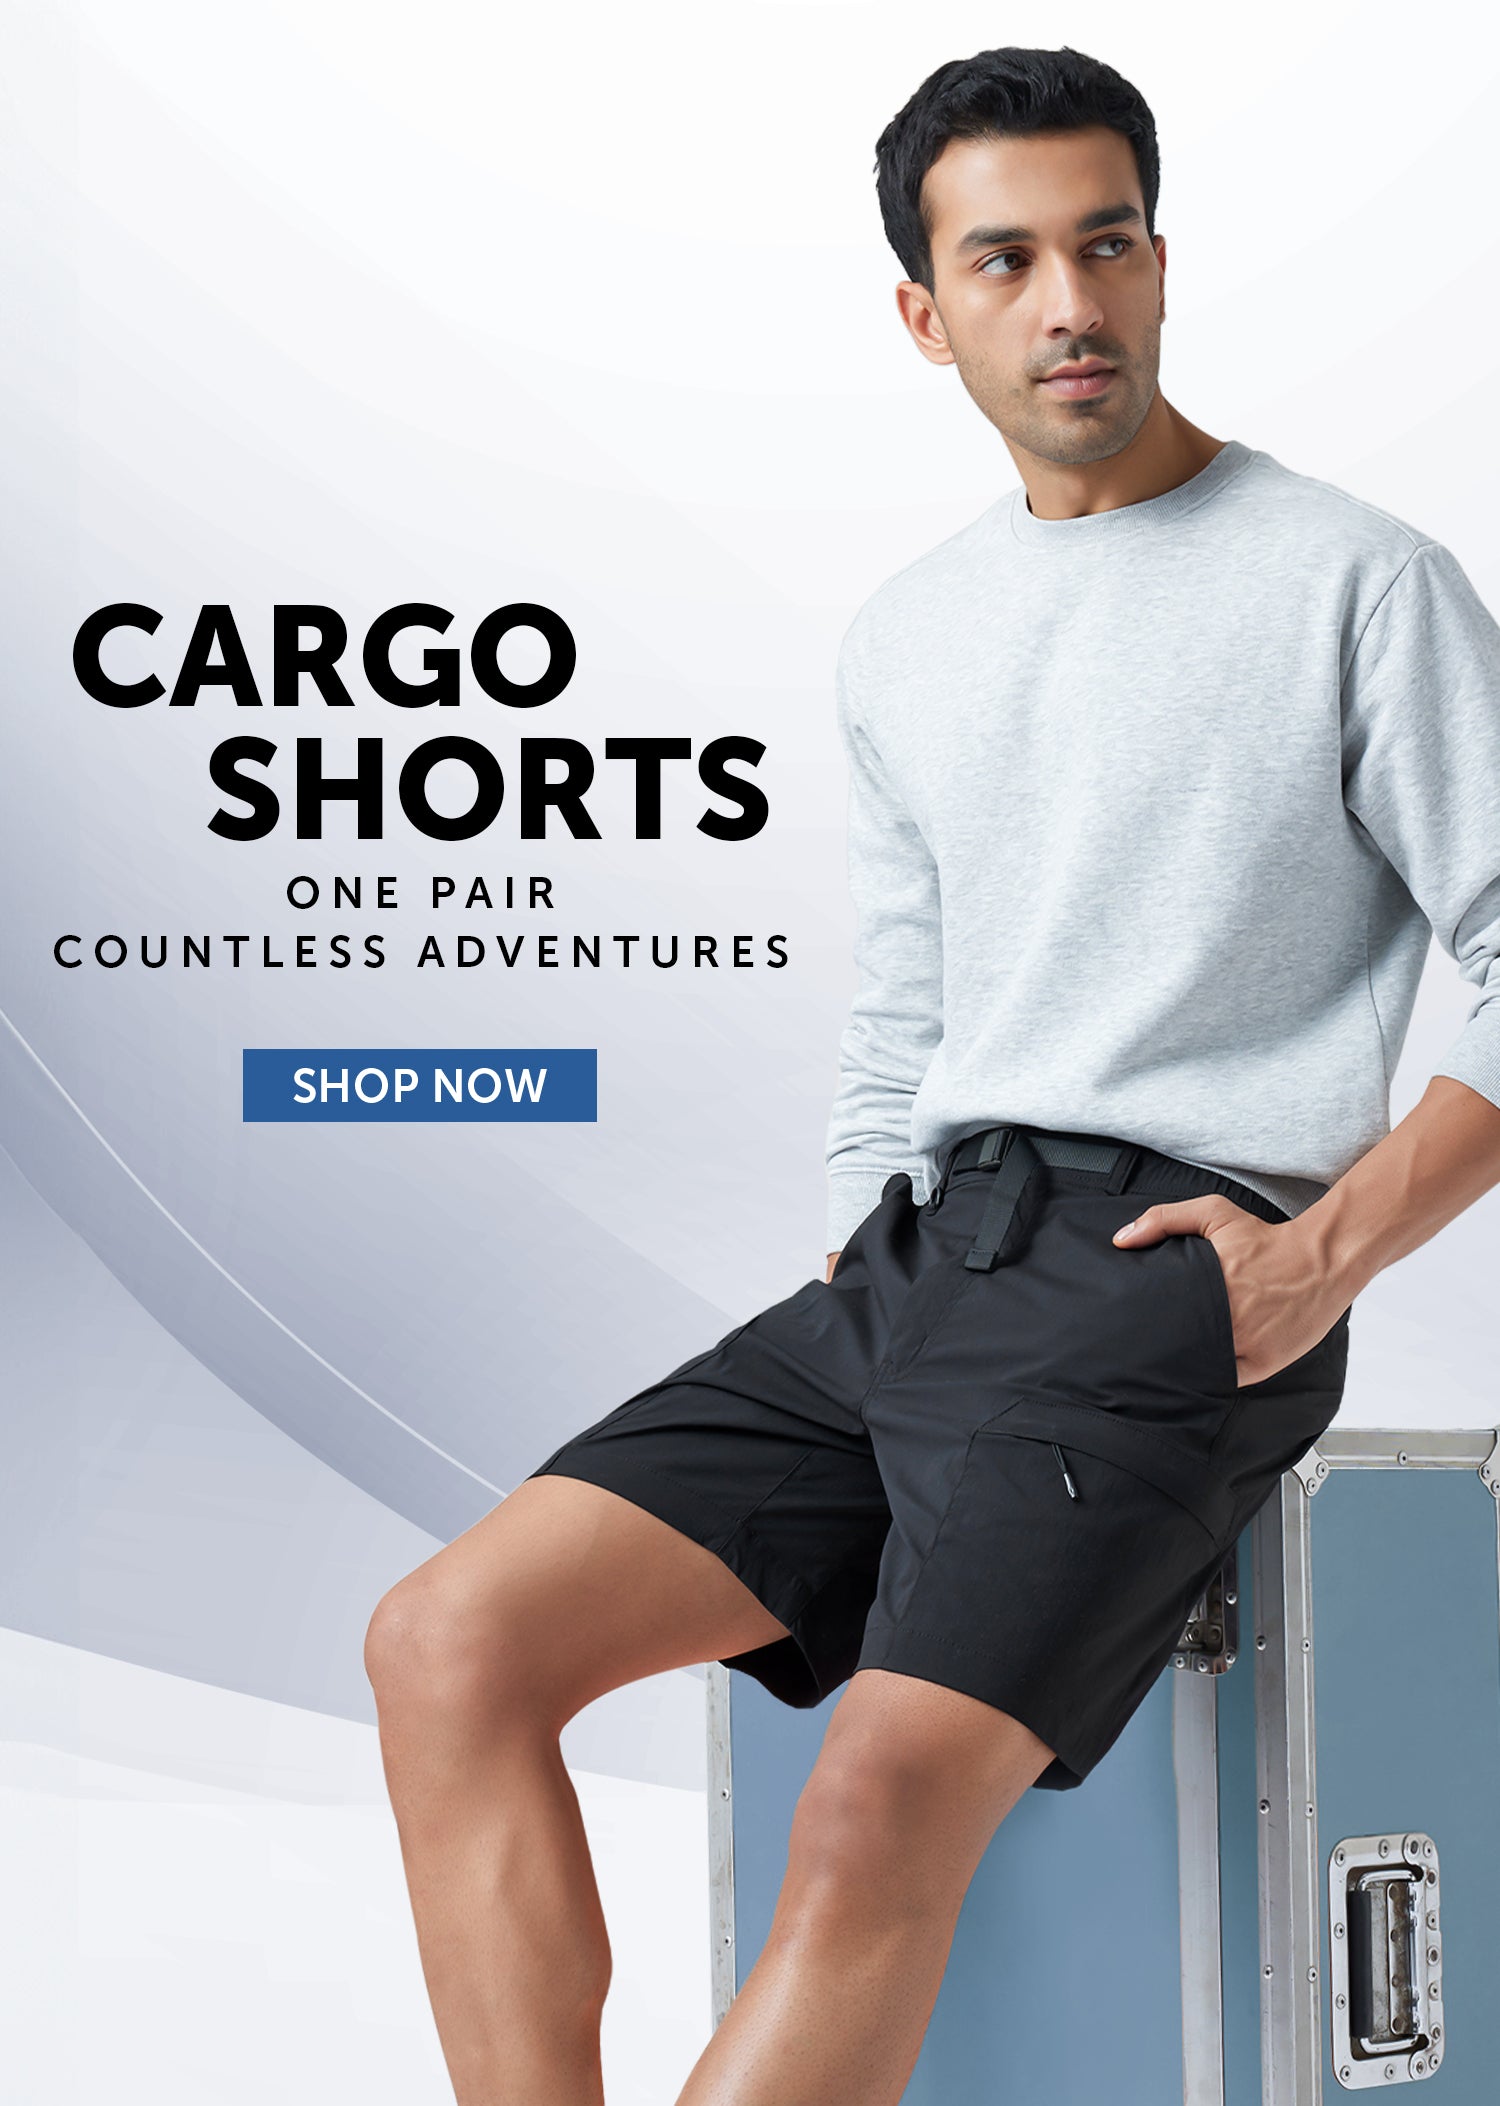 homepage-banner-chino-shorts-mobile